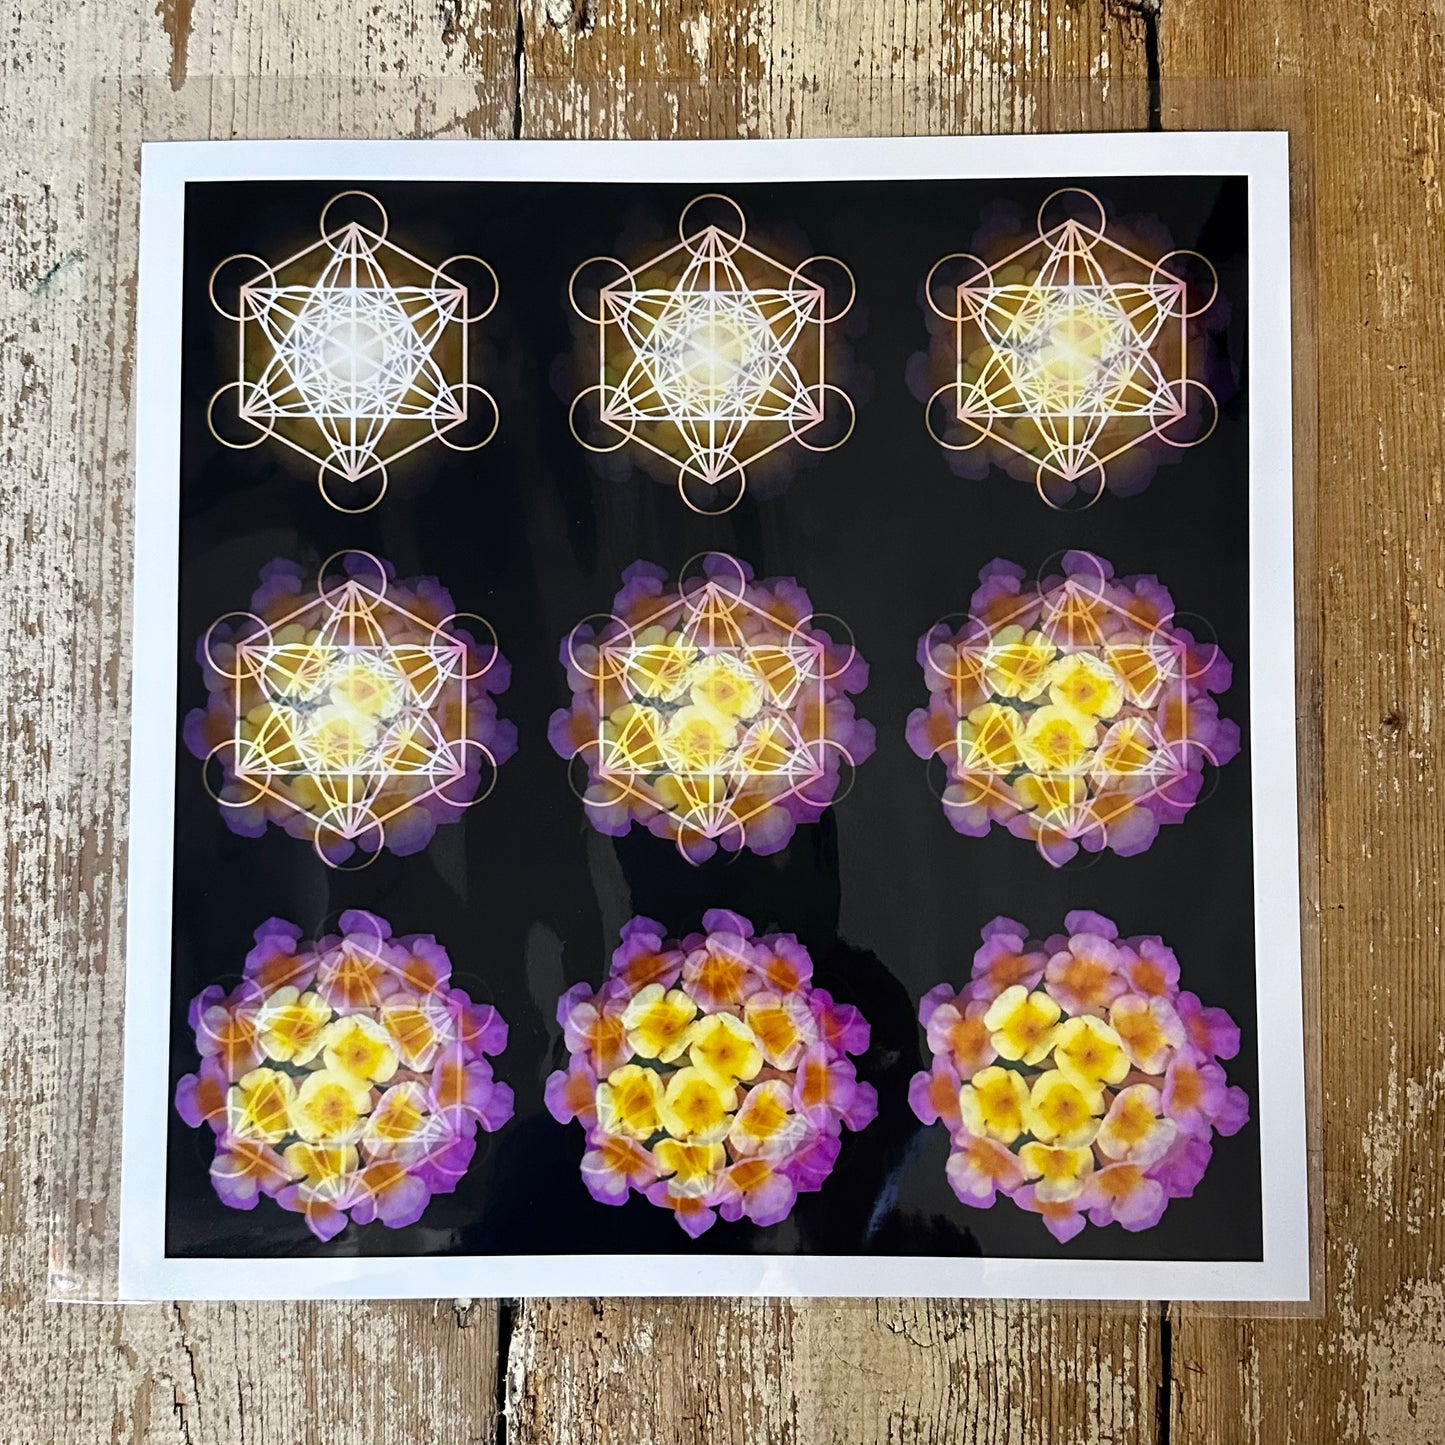 The Geometry of a Flower 2 C-Type Print